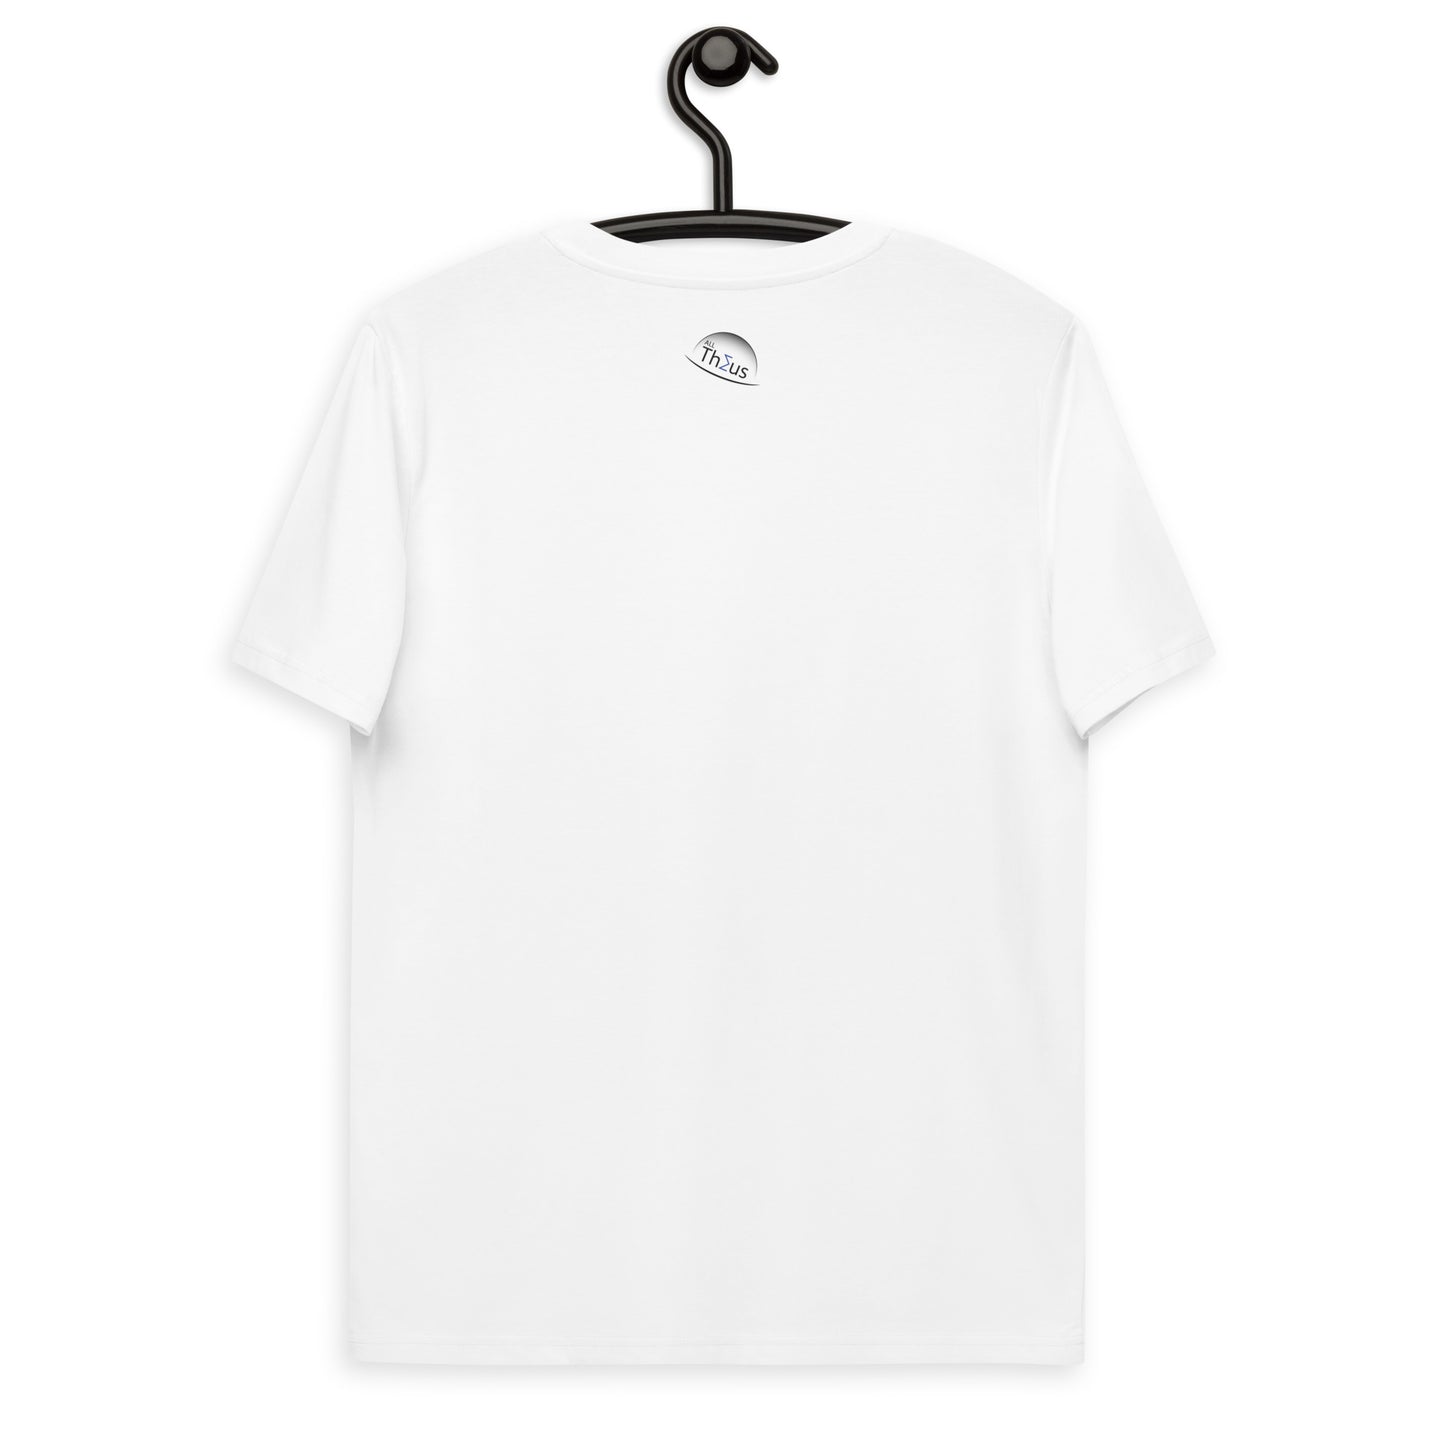 Unisex organic cotton t-shirt - Topology Has The Most Hol(E)y and Shapely Nerds